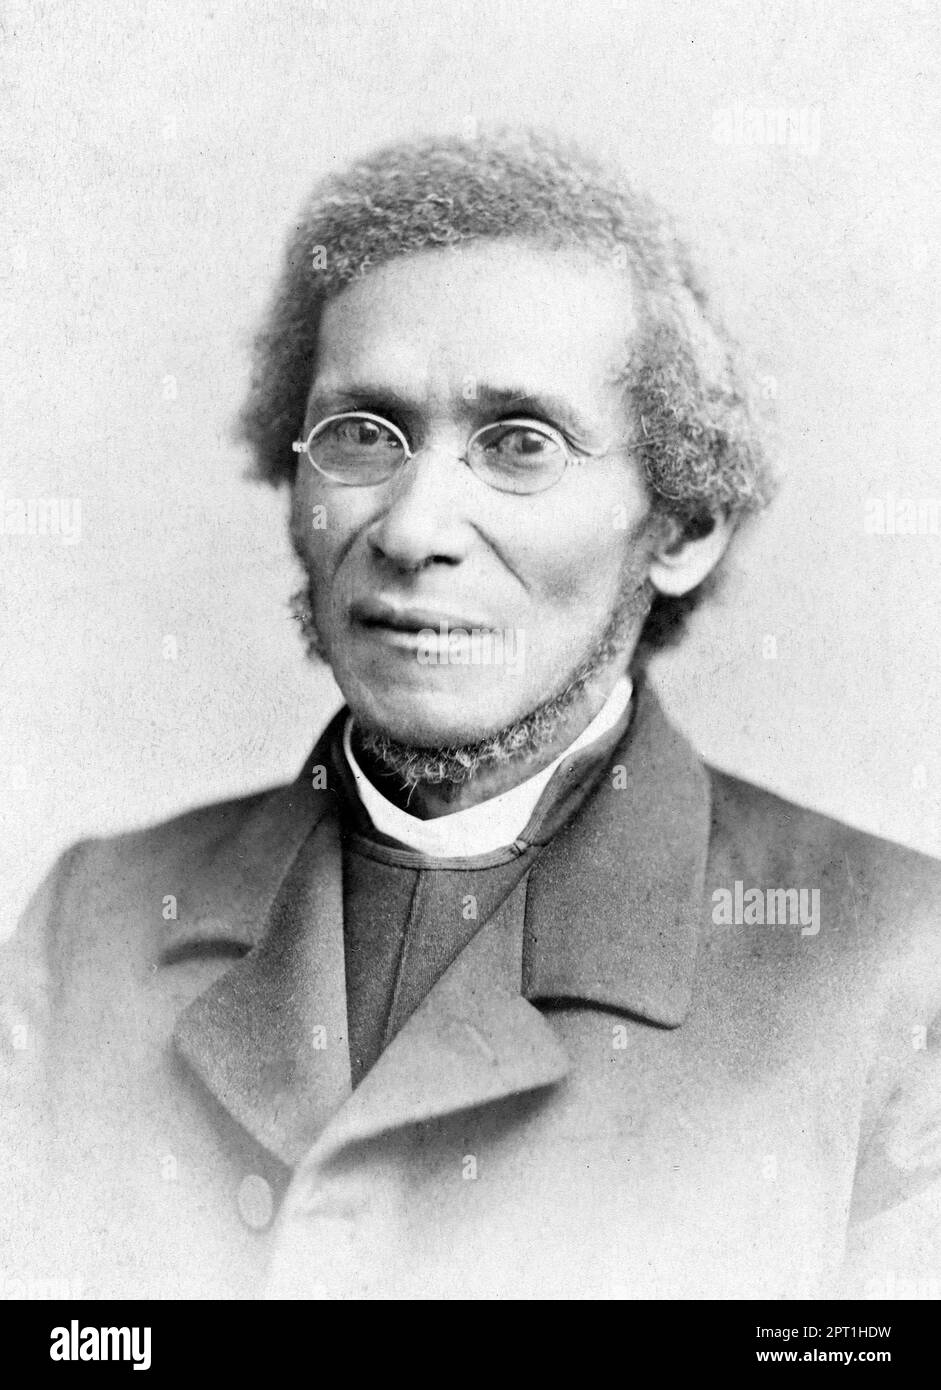 Daniel Payne. Portrait of the American bishop and a major shaper of the African Methodist Episcopal Church (A.M.E.), Bishop Daniel Alexander Payne (1811-1893) by Frederick Gutekunst, c. 1888 Stock Photo